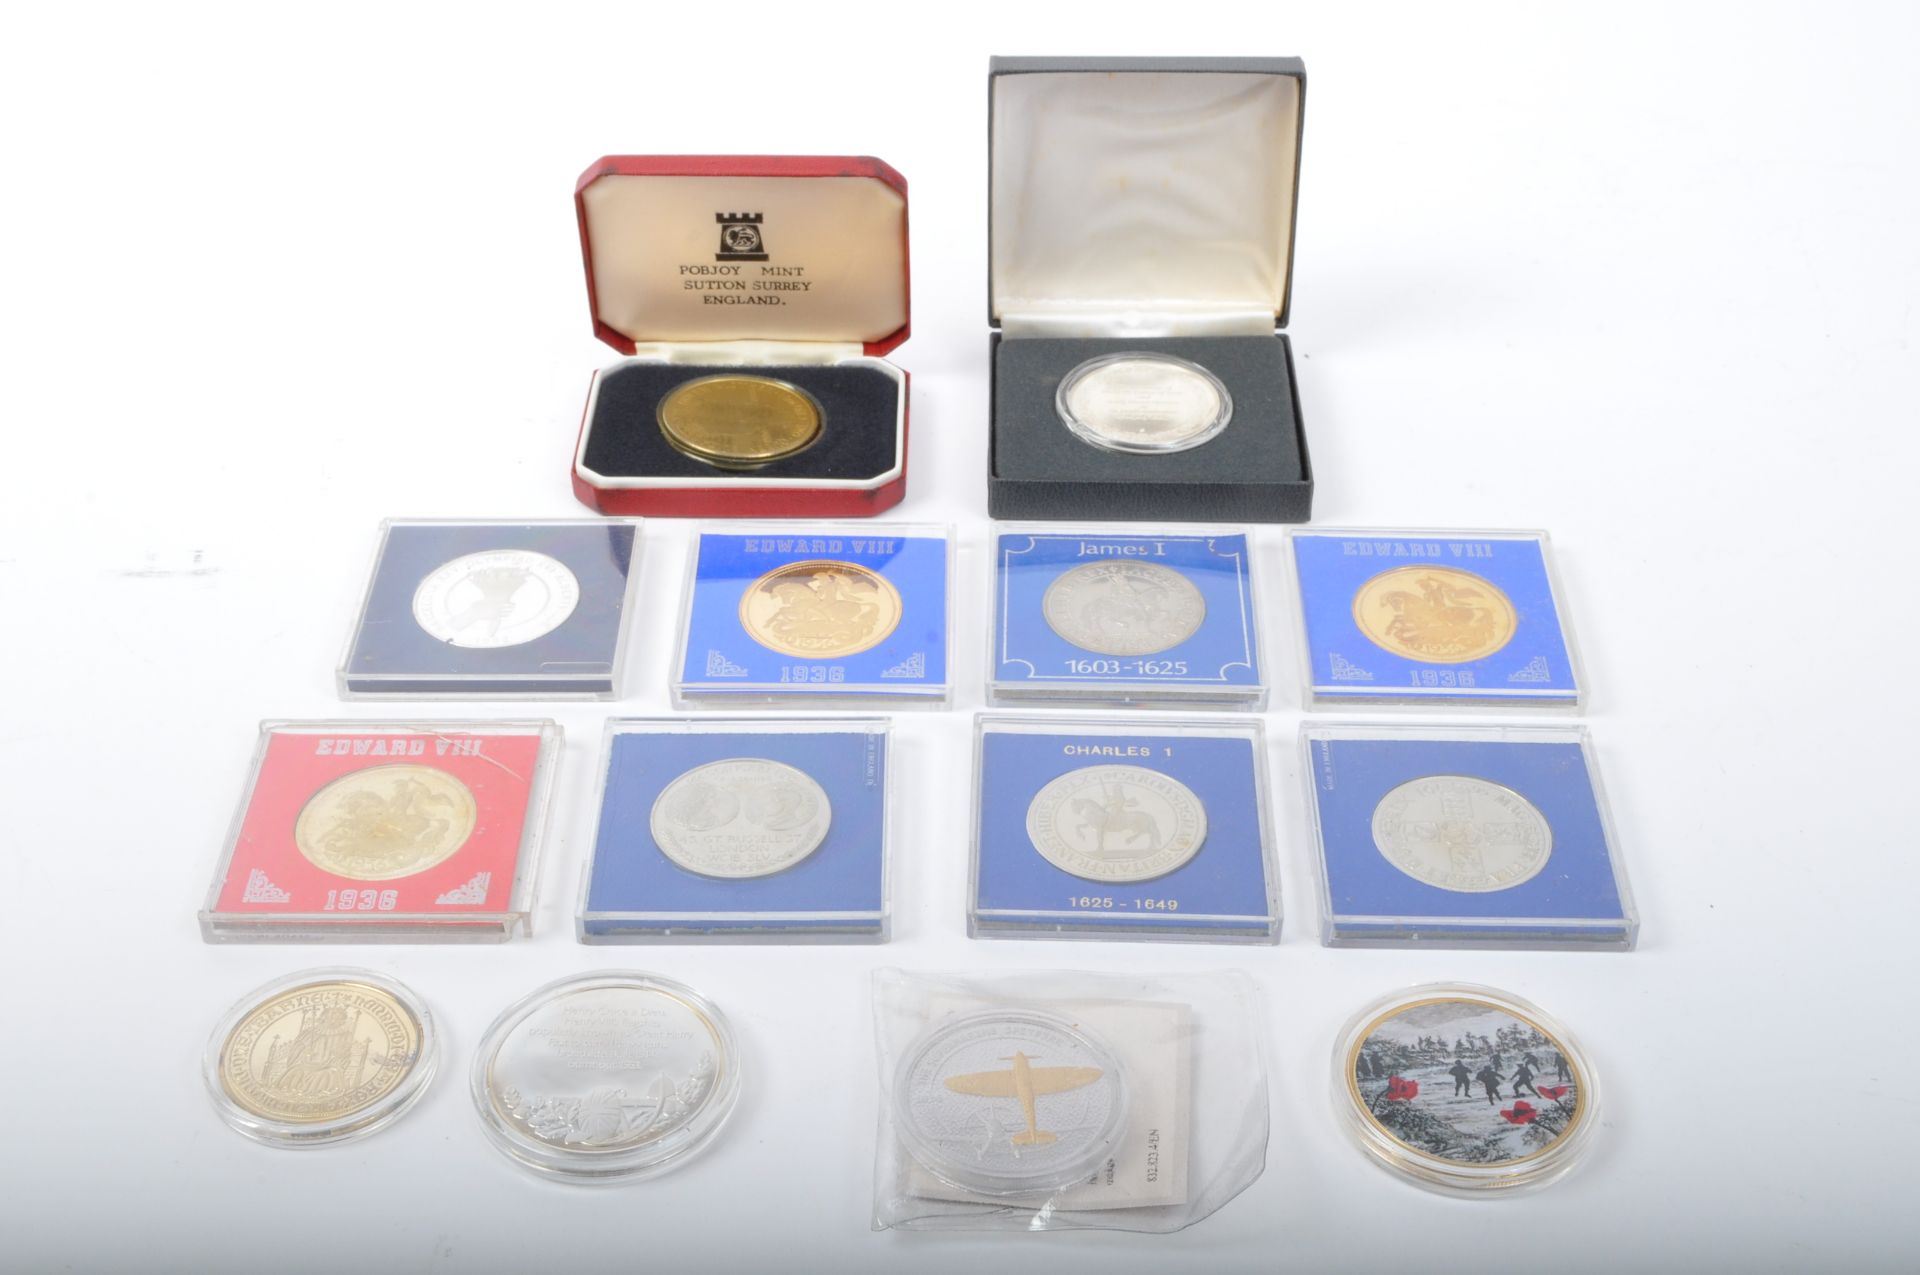 COLLECTION OF UK COMMEMORATIVE COINS & MEDALS